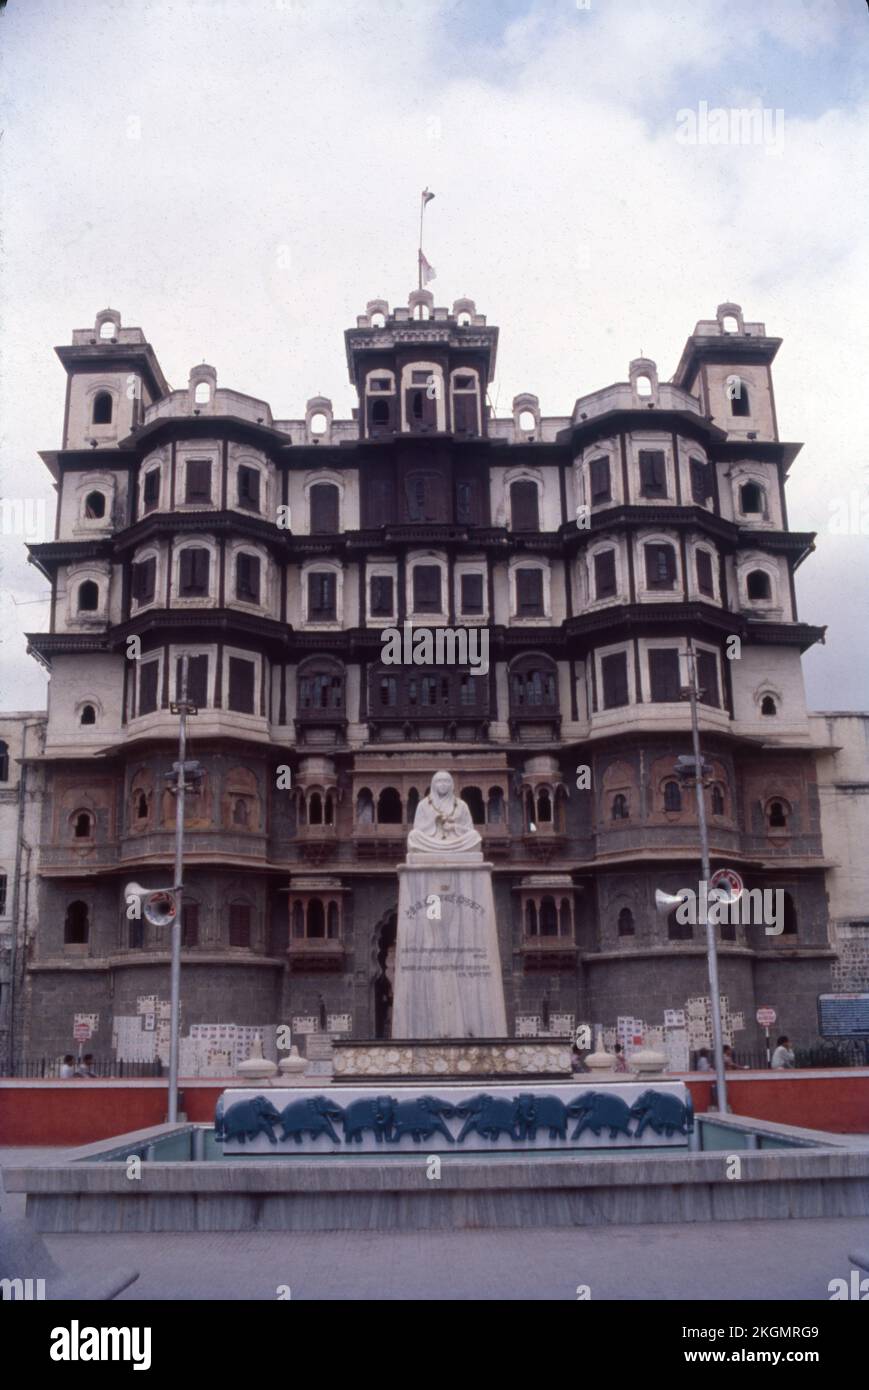 Rajwada is a historical palace in the city of Indore, Madhya Pradesh. It was built by the Holkars of the Maratha Empire about two centuries ago. This seven storied structure is located near the Chhatris. Stock Photo